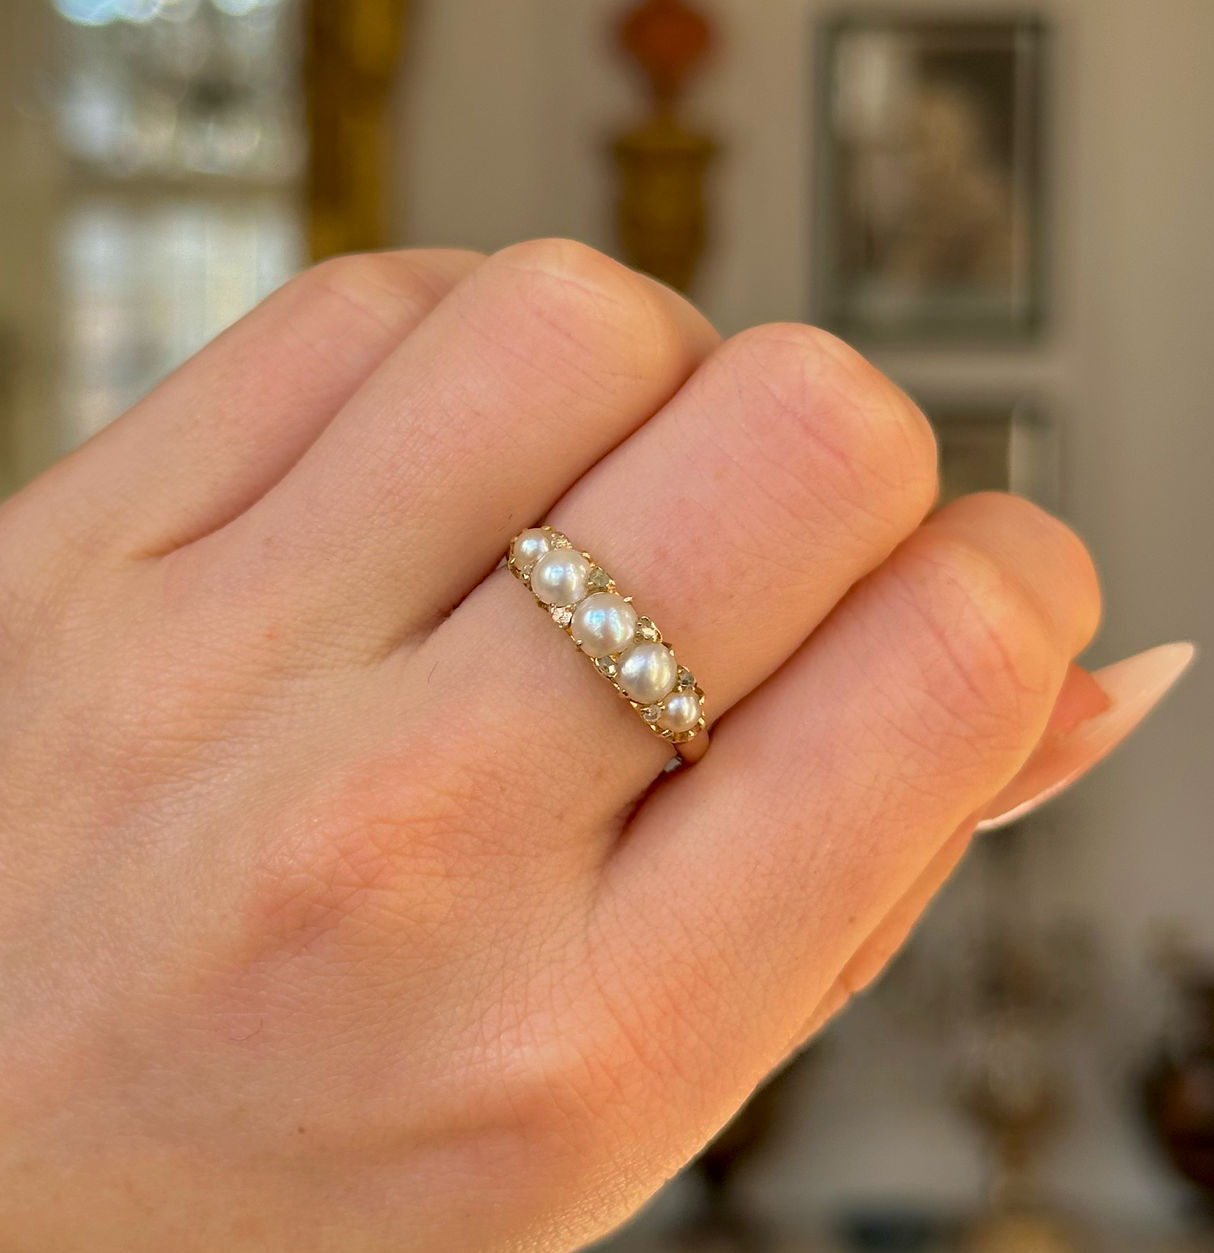 Antique, Victorian Pearl and Diamond Half Hoop Ring, 18ct Yellow Gold worn on closed hand.